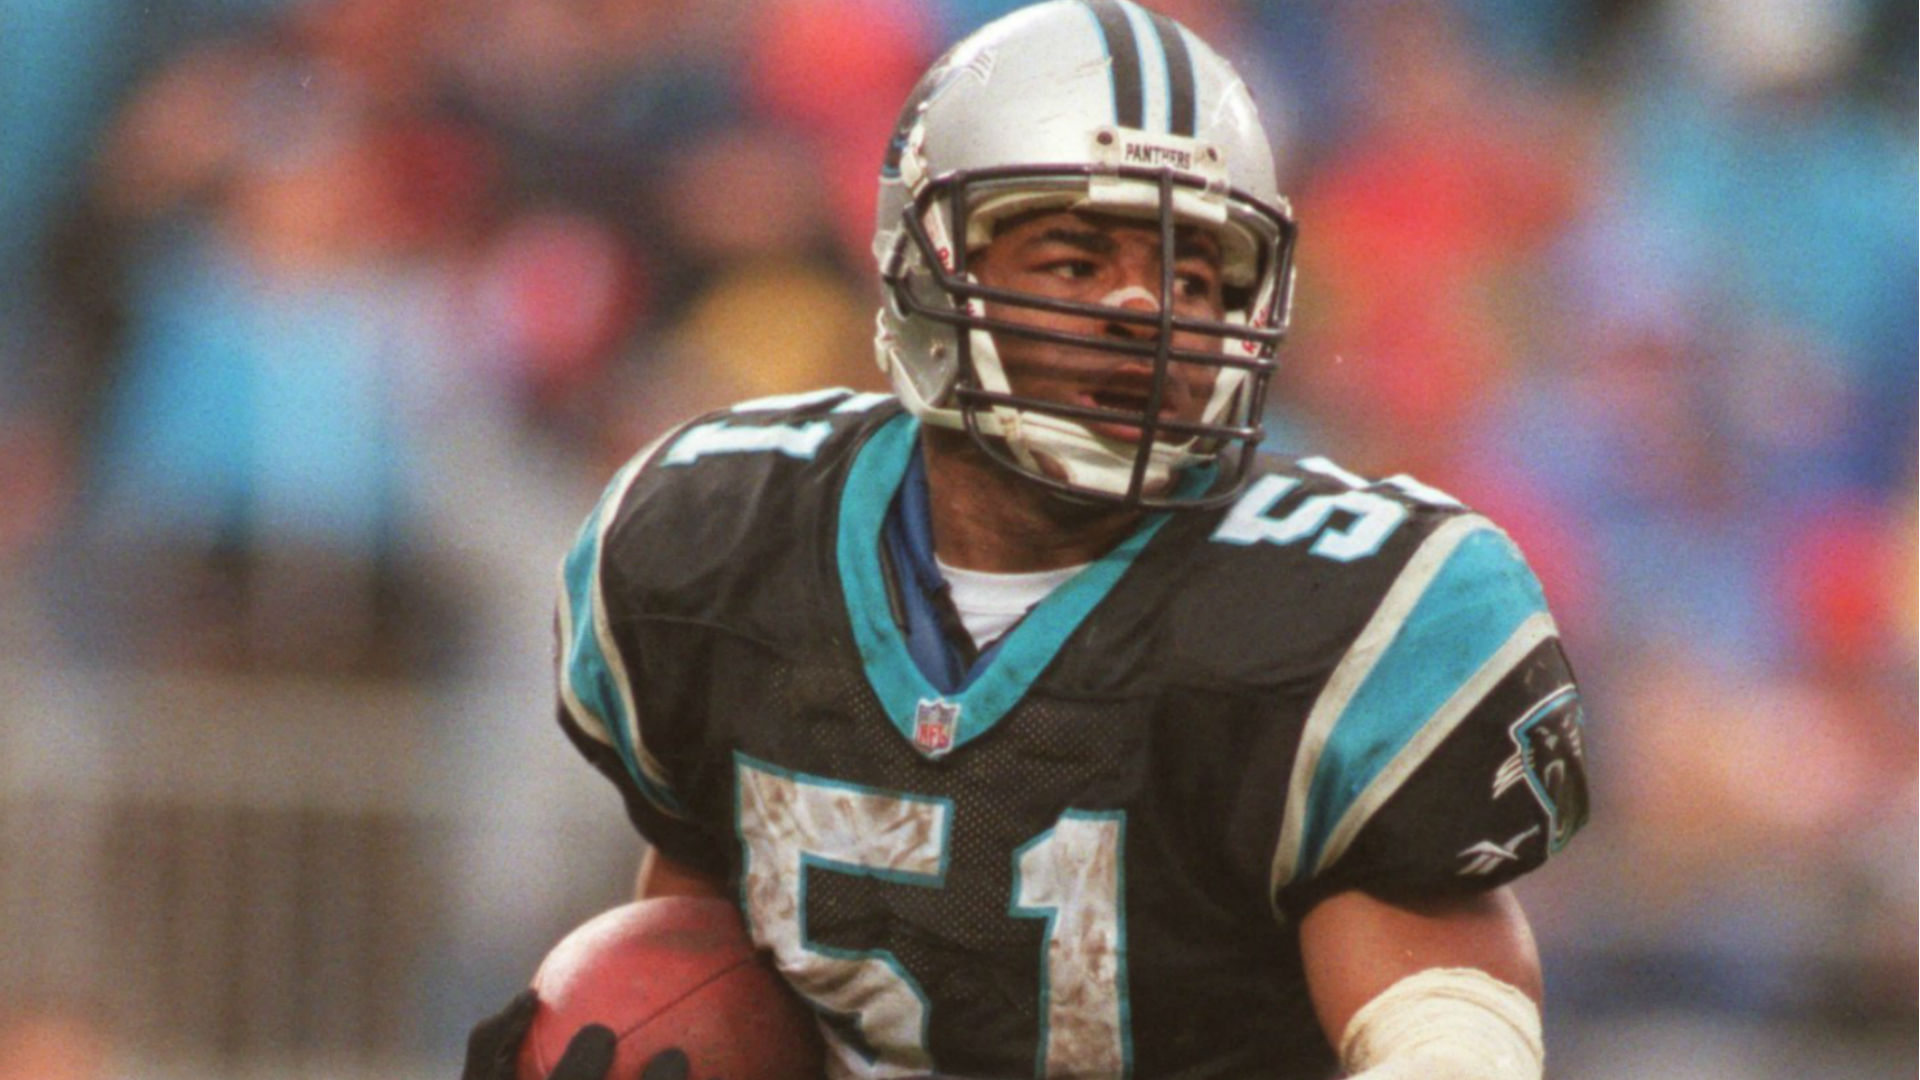 Panthers to honor Sam Mills with '51' decal vs. Eagles